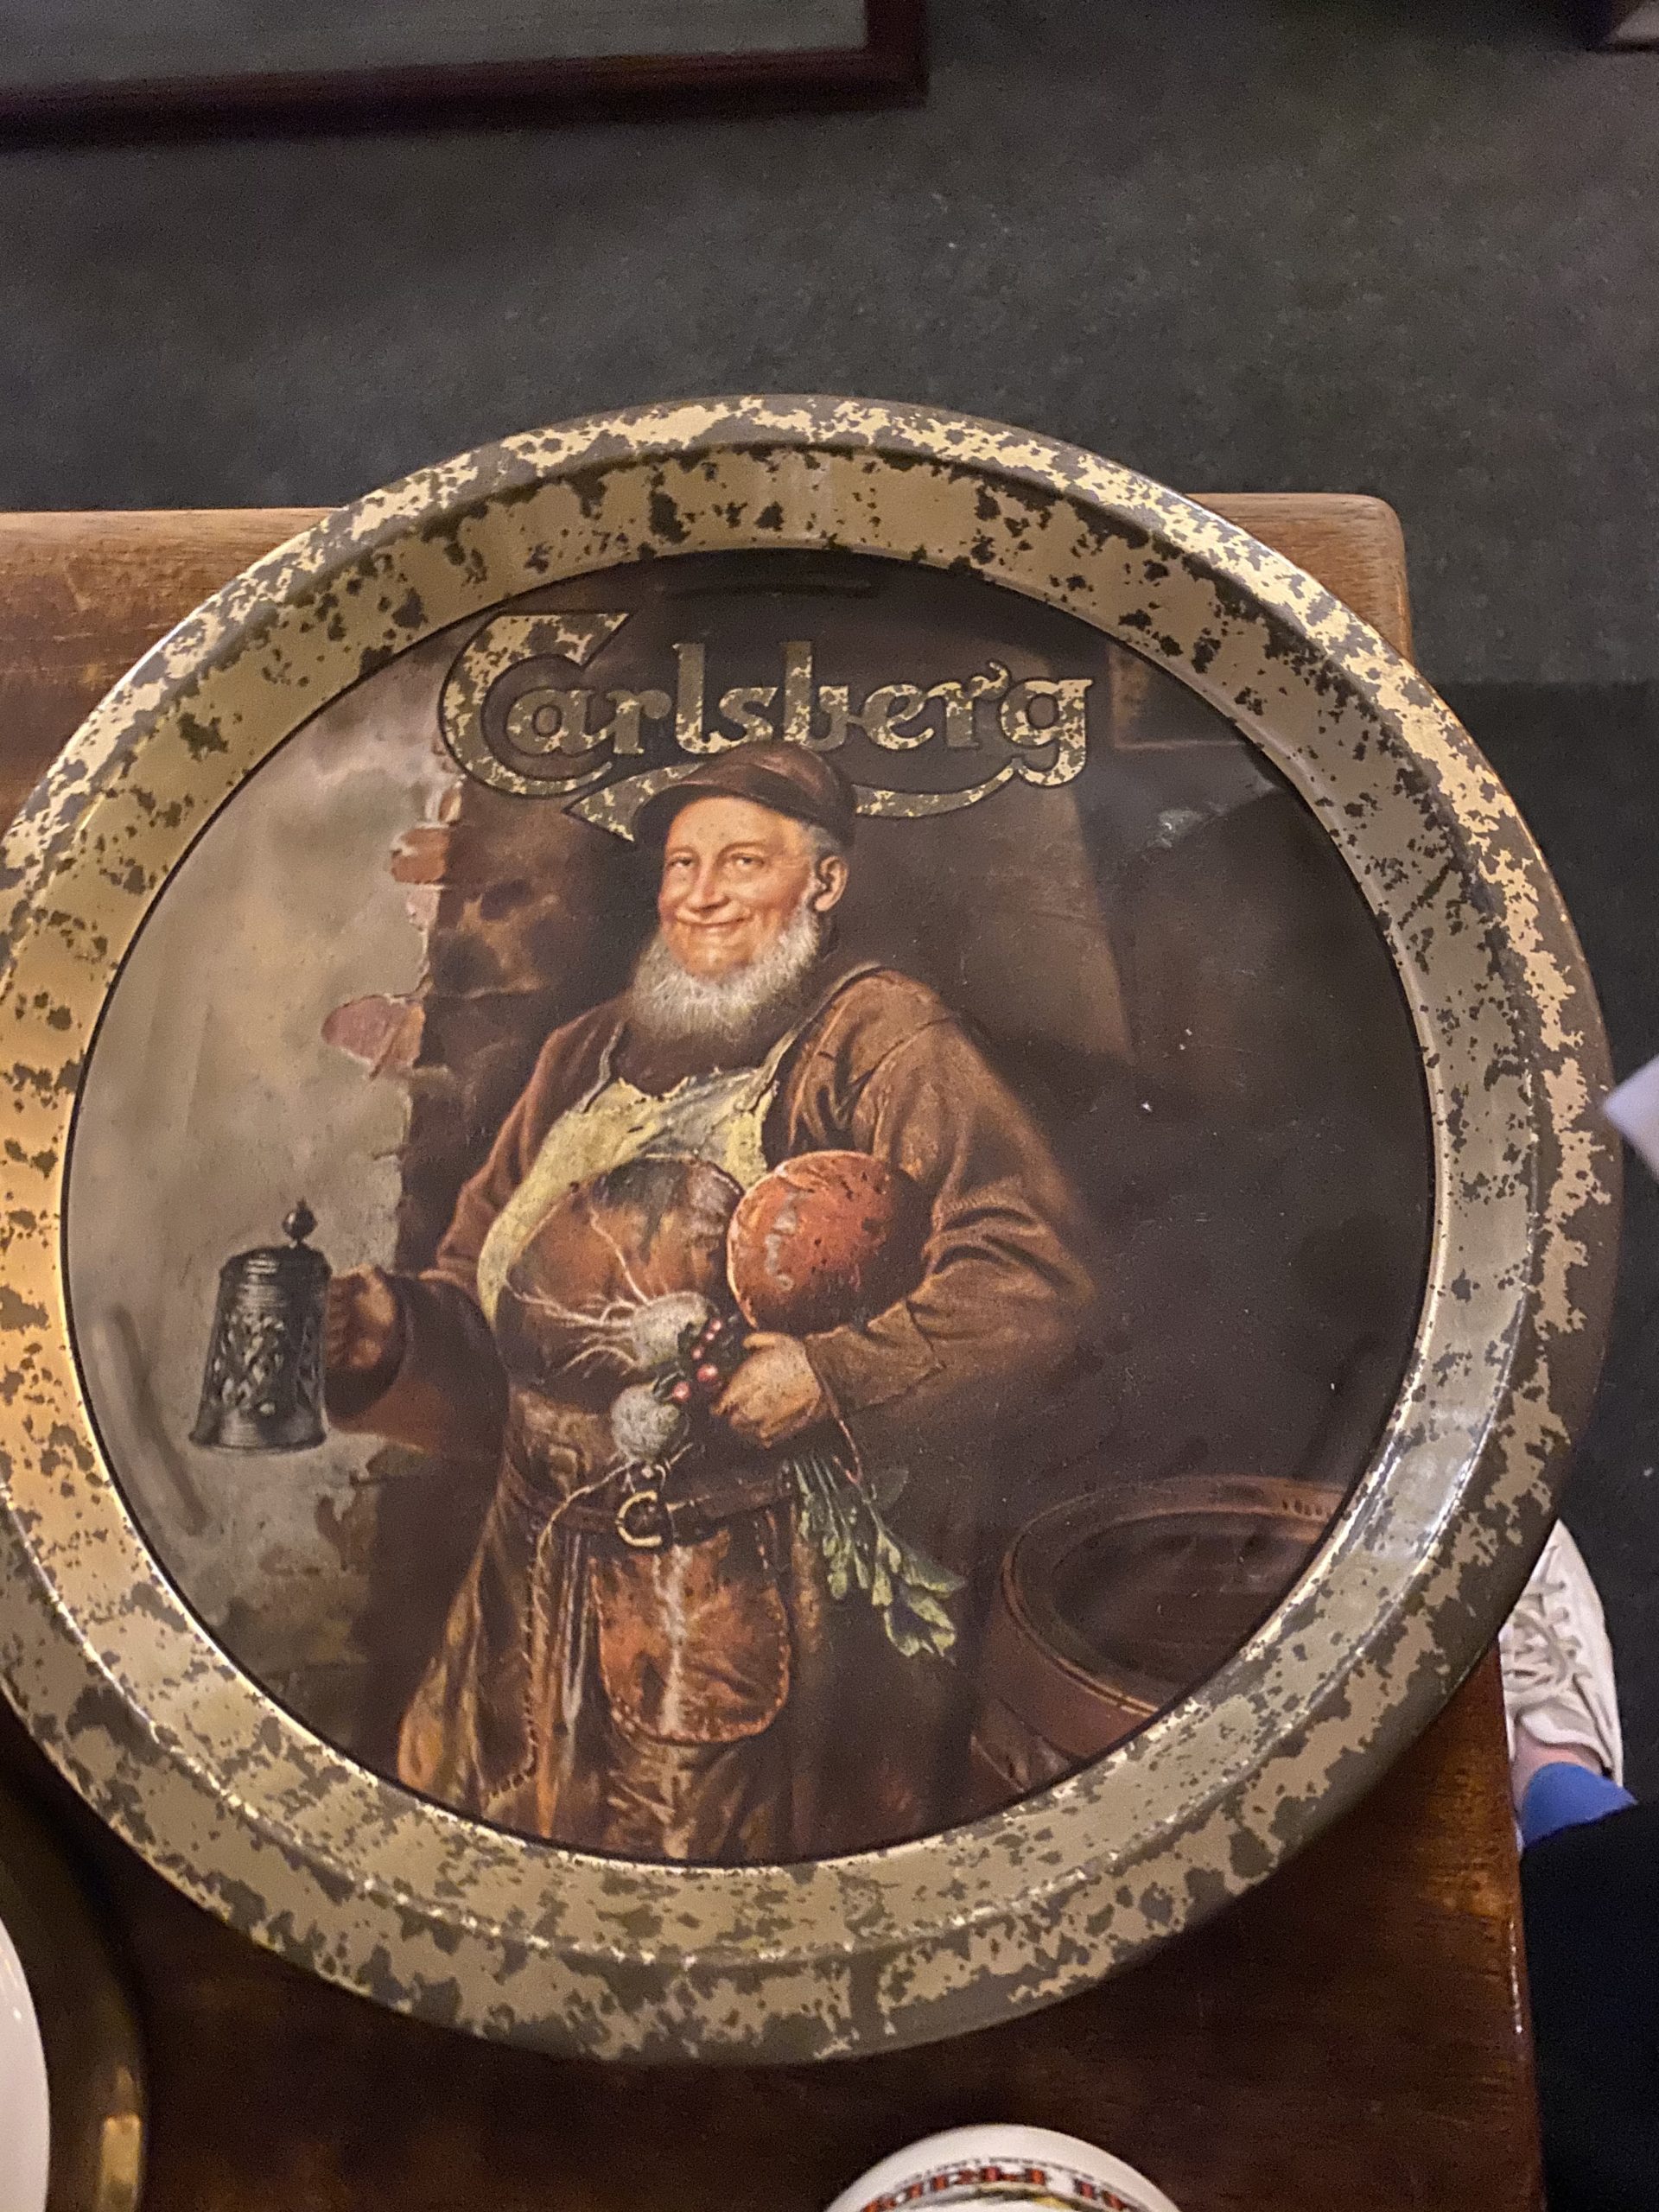 Carlsberg beer tray - Used Pub and Hotel Equipment